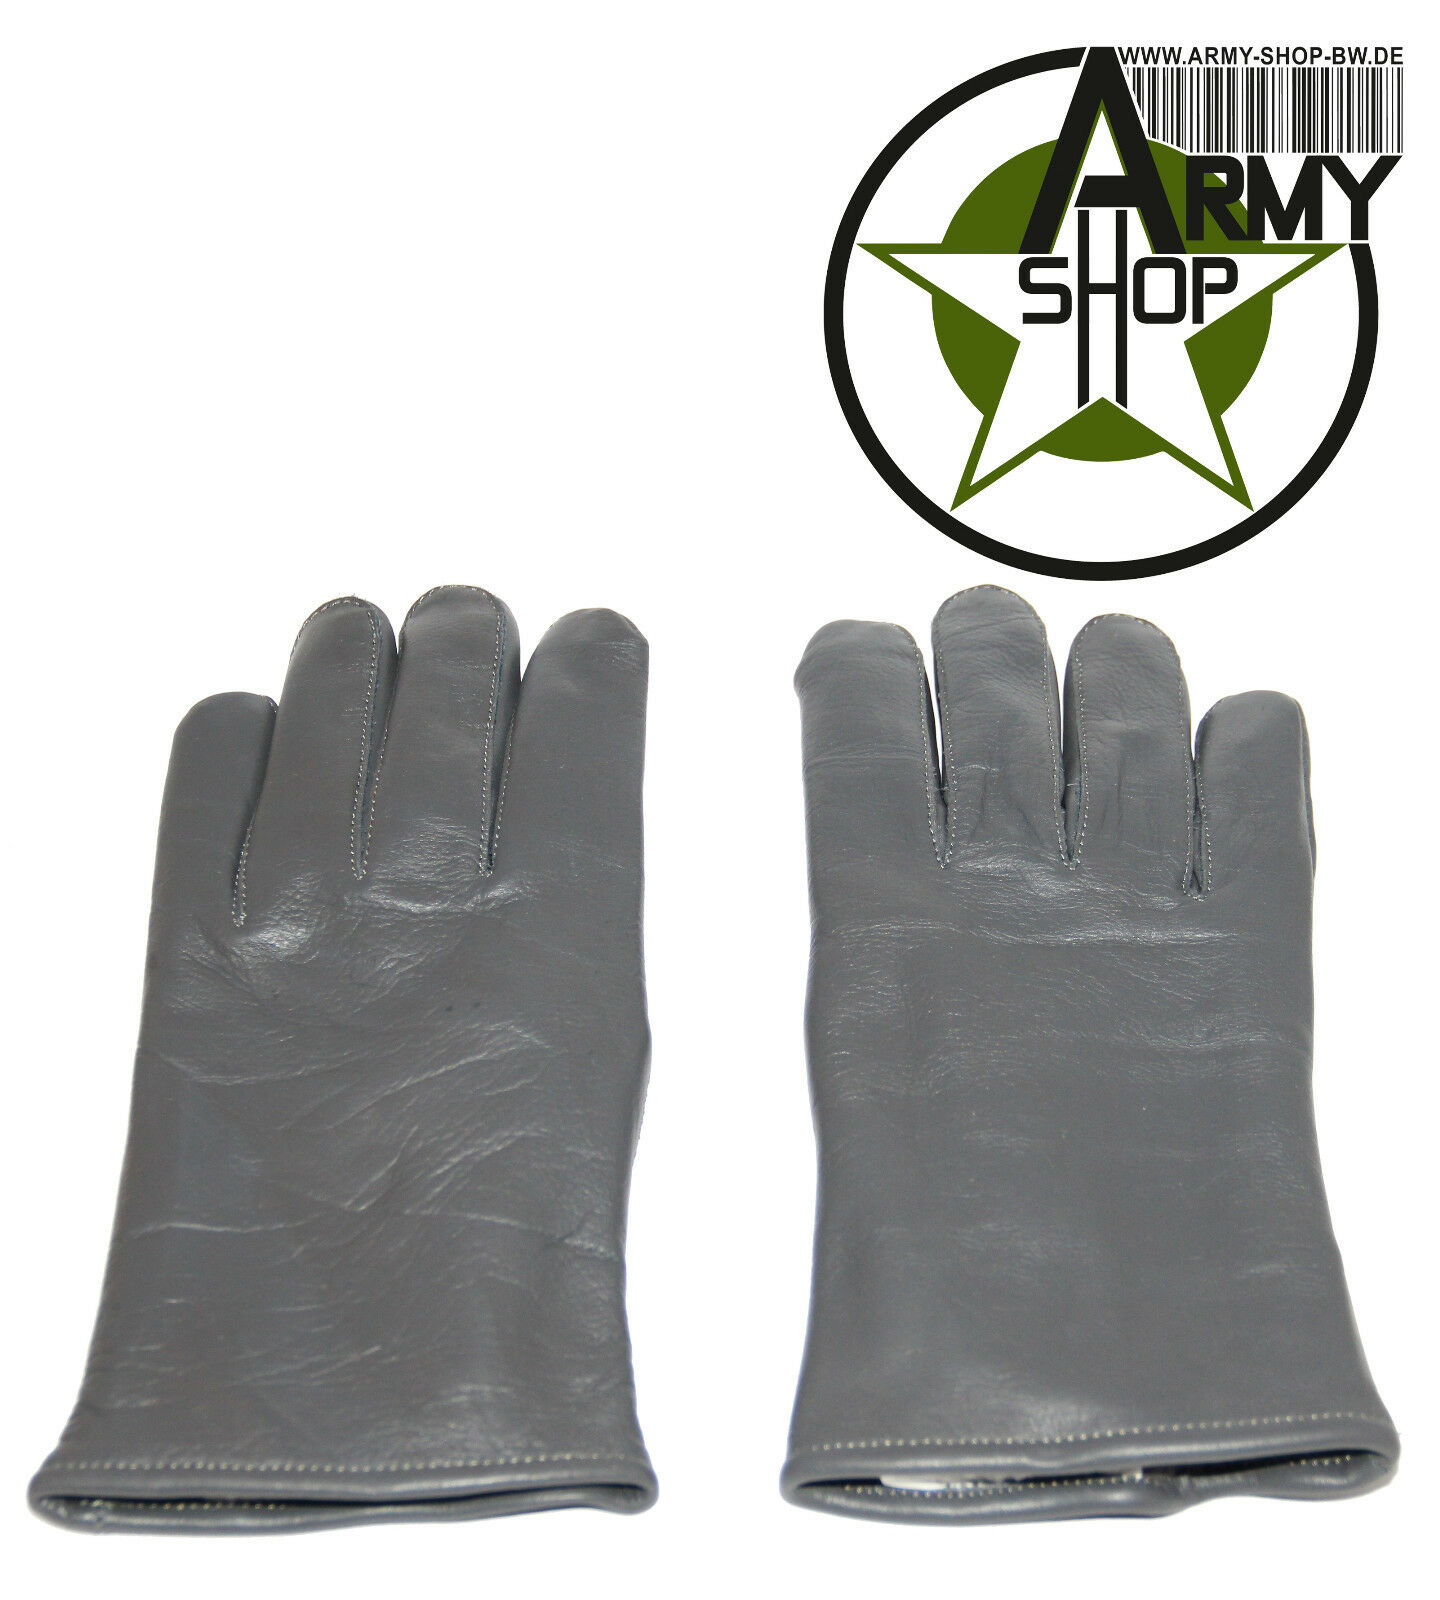 Bw Winter Leather Gloves with Lining German Armed Forces Warm S M L XL XXL New